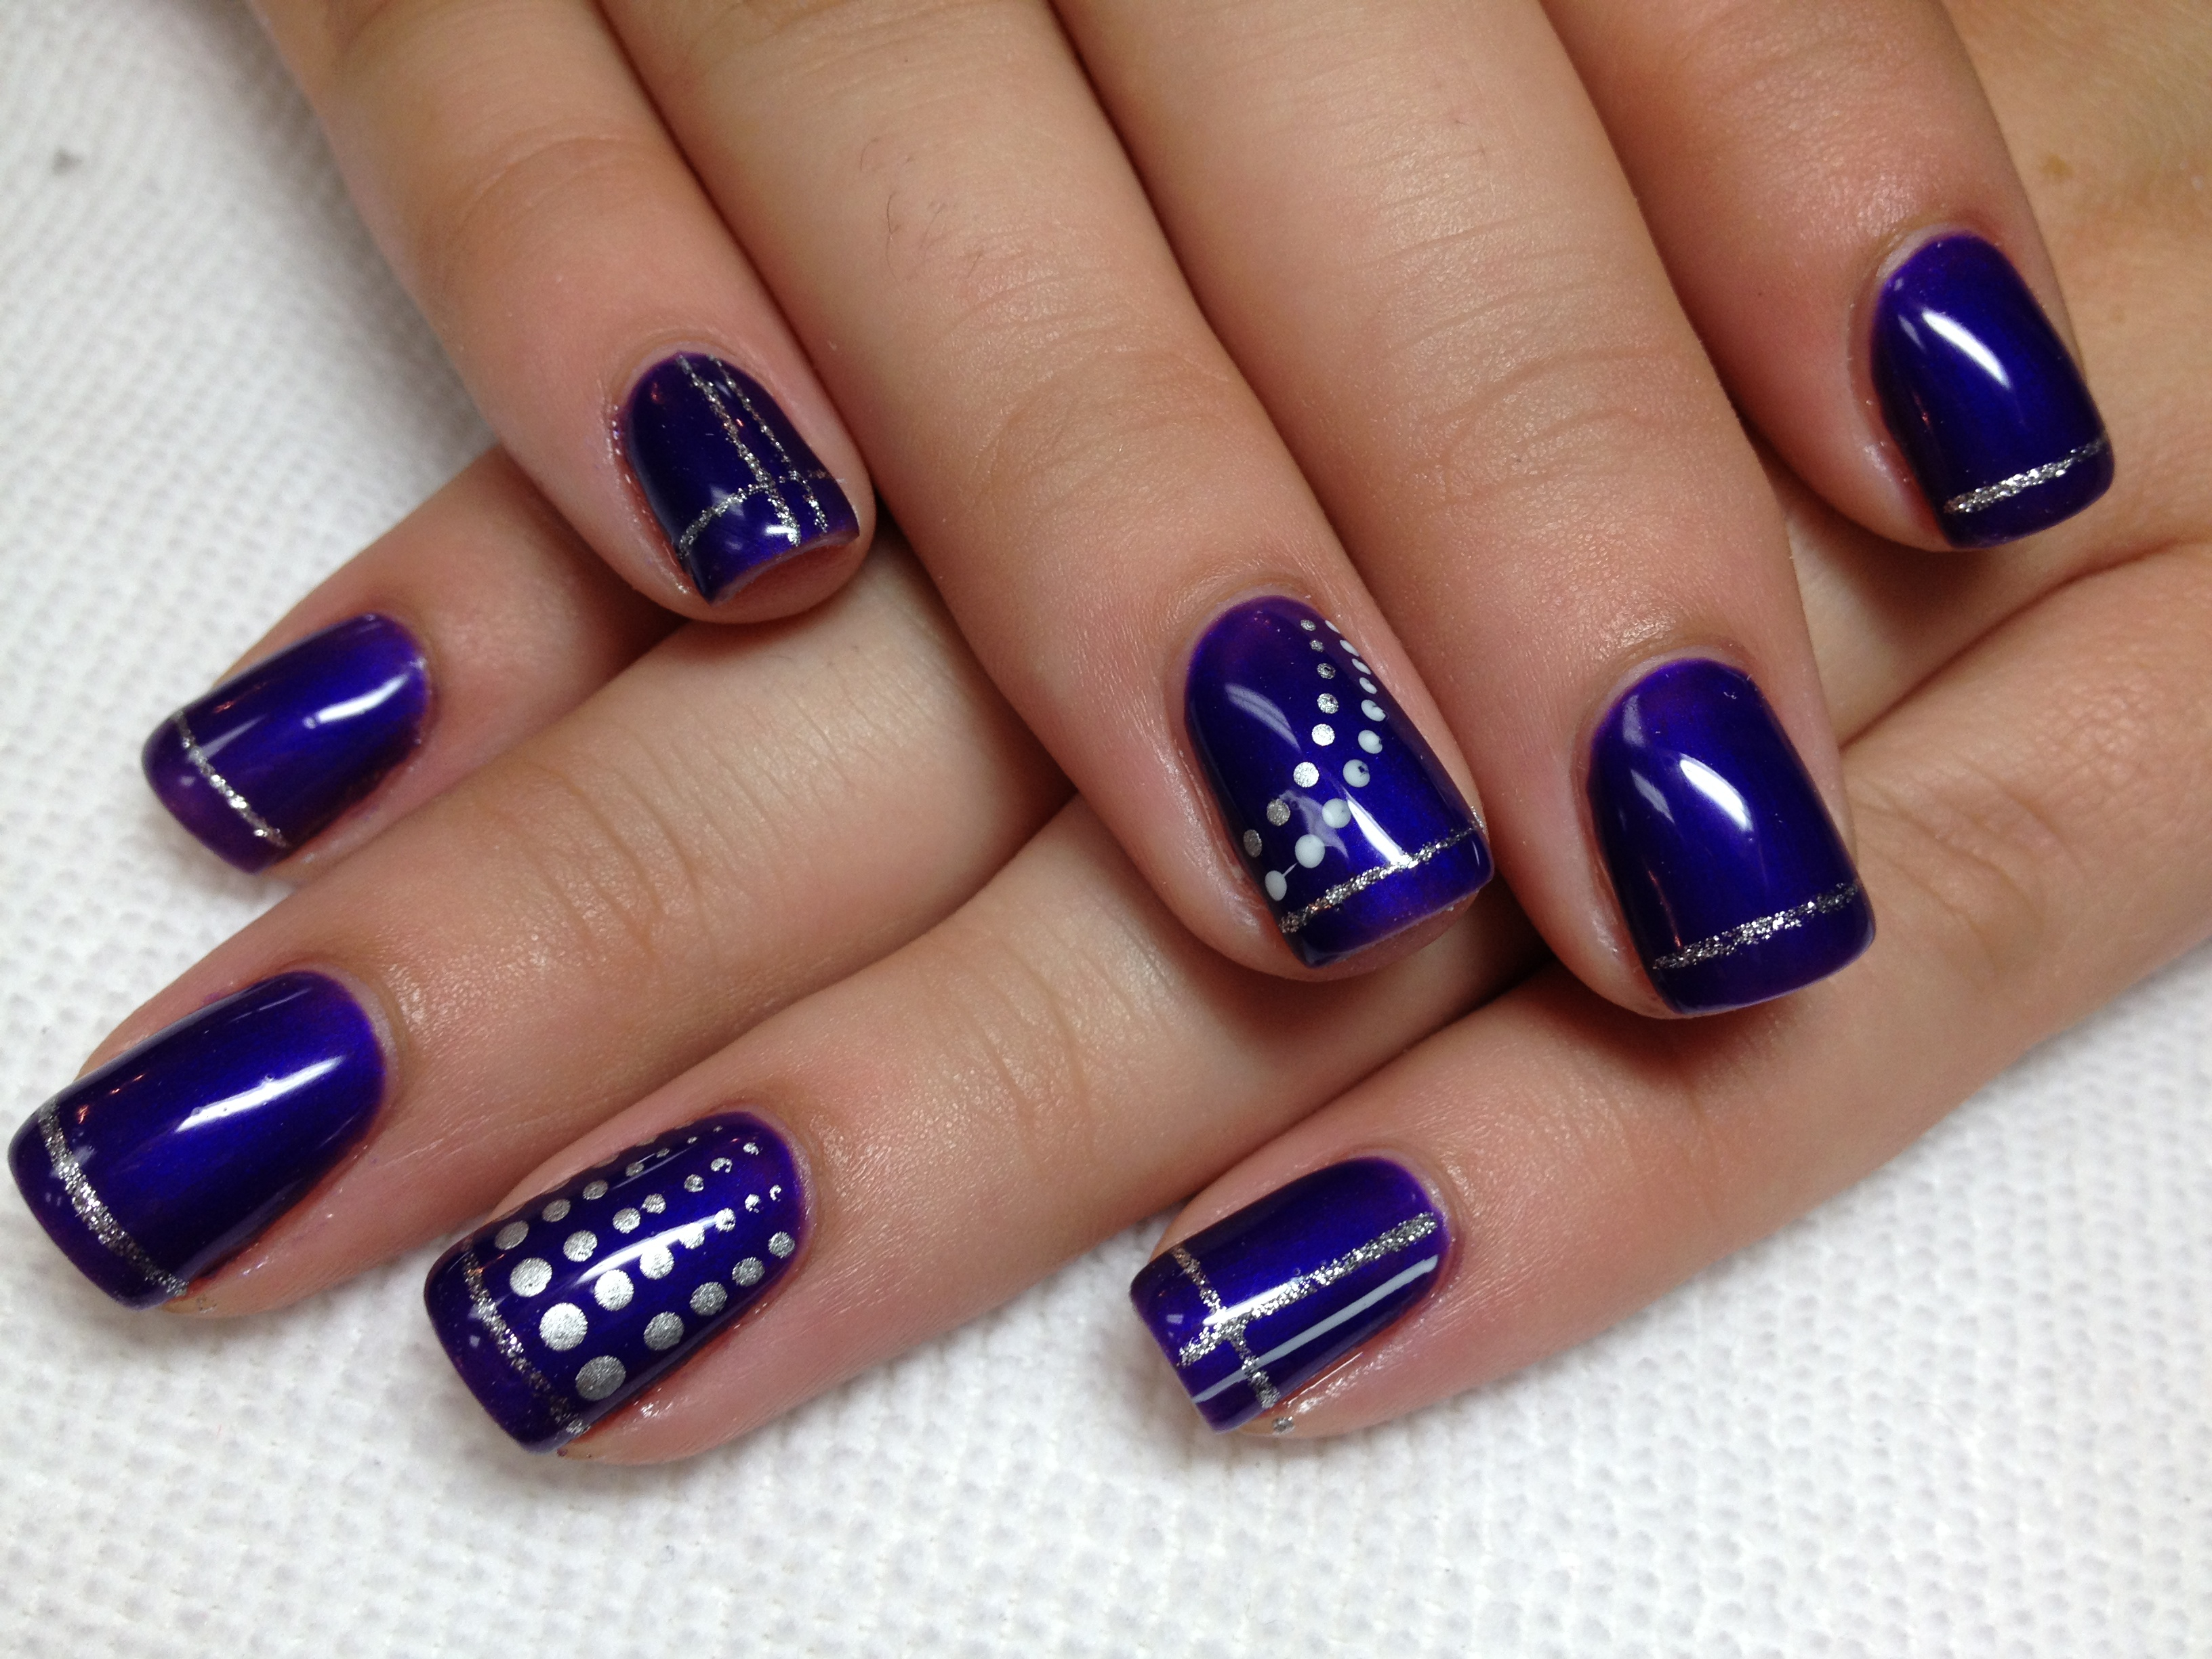 20 Purple And Silver Cute Nail Designs Images - Purple Nail Designs, Purple  Nail Designs and Black Purple and Silver Nail Designs / 